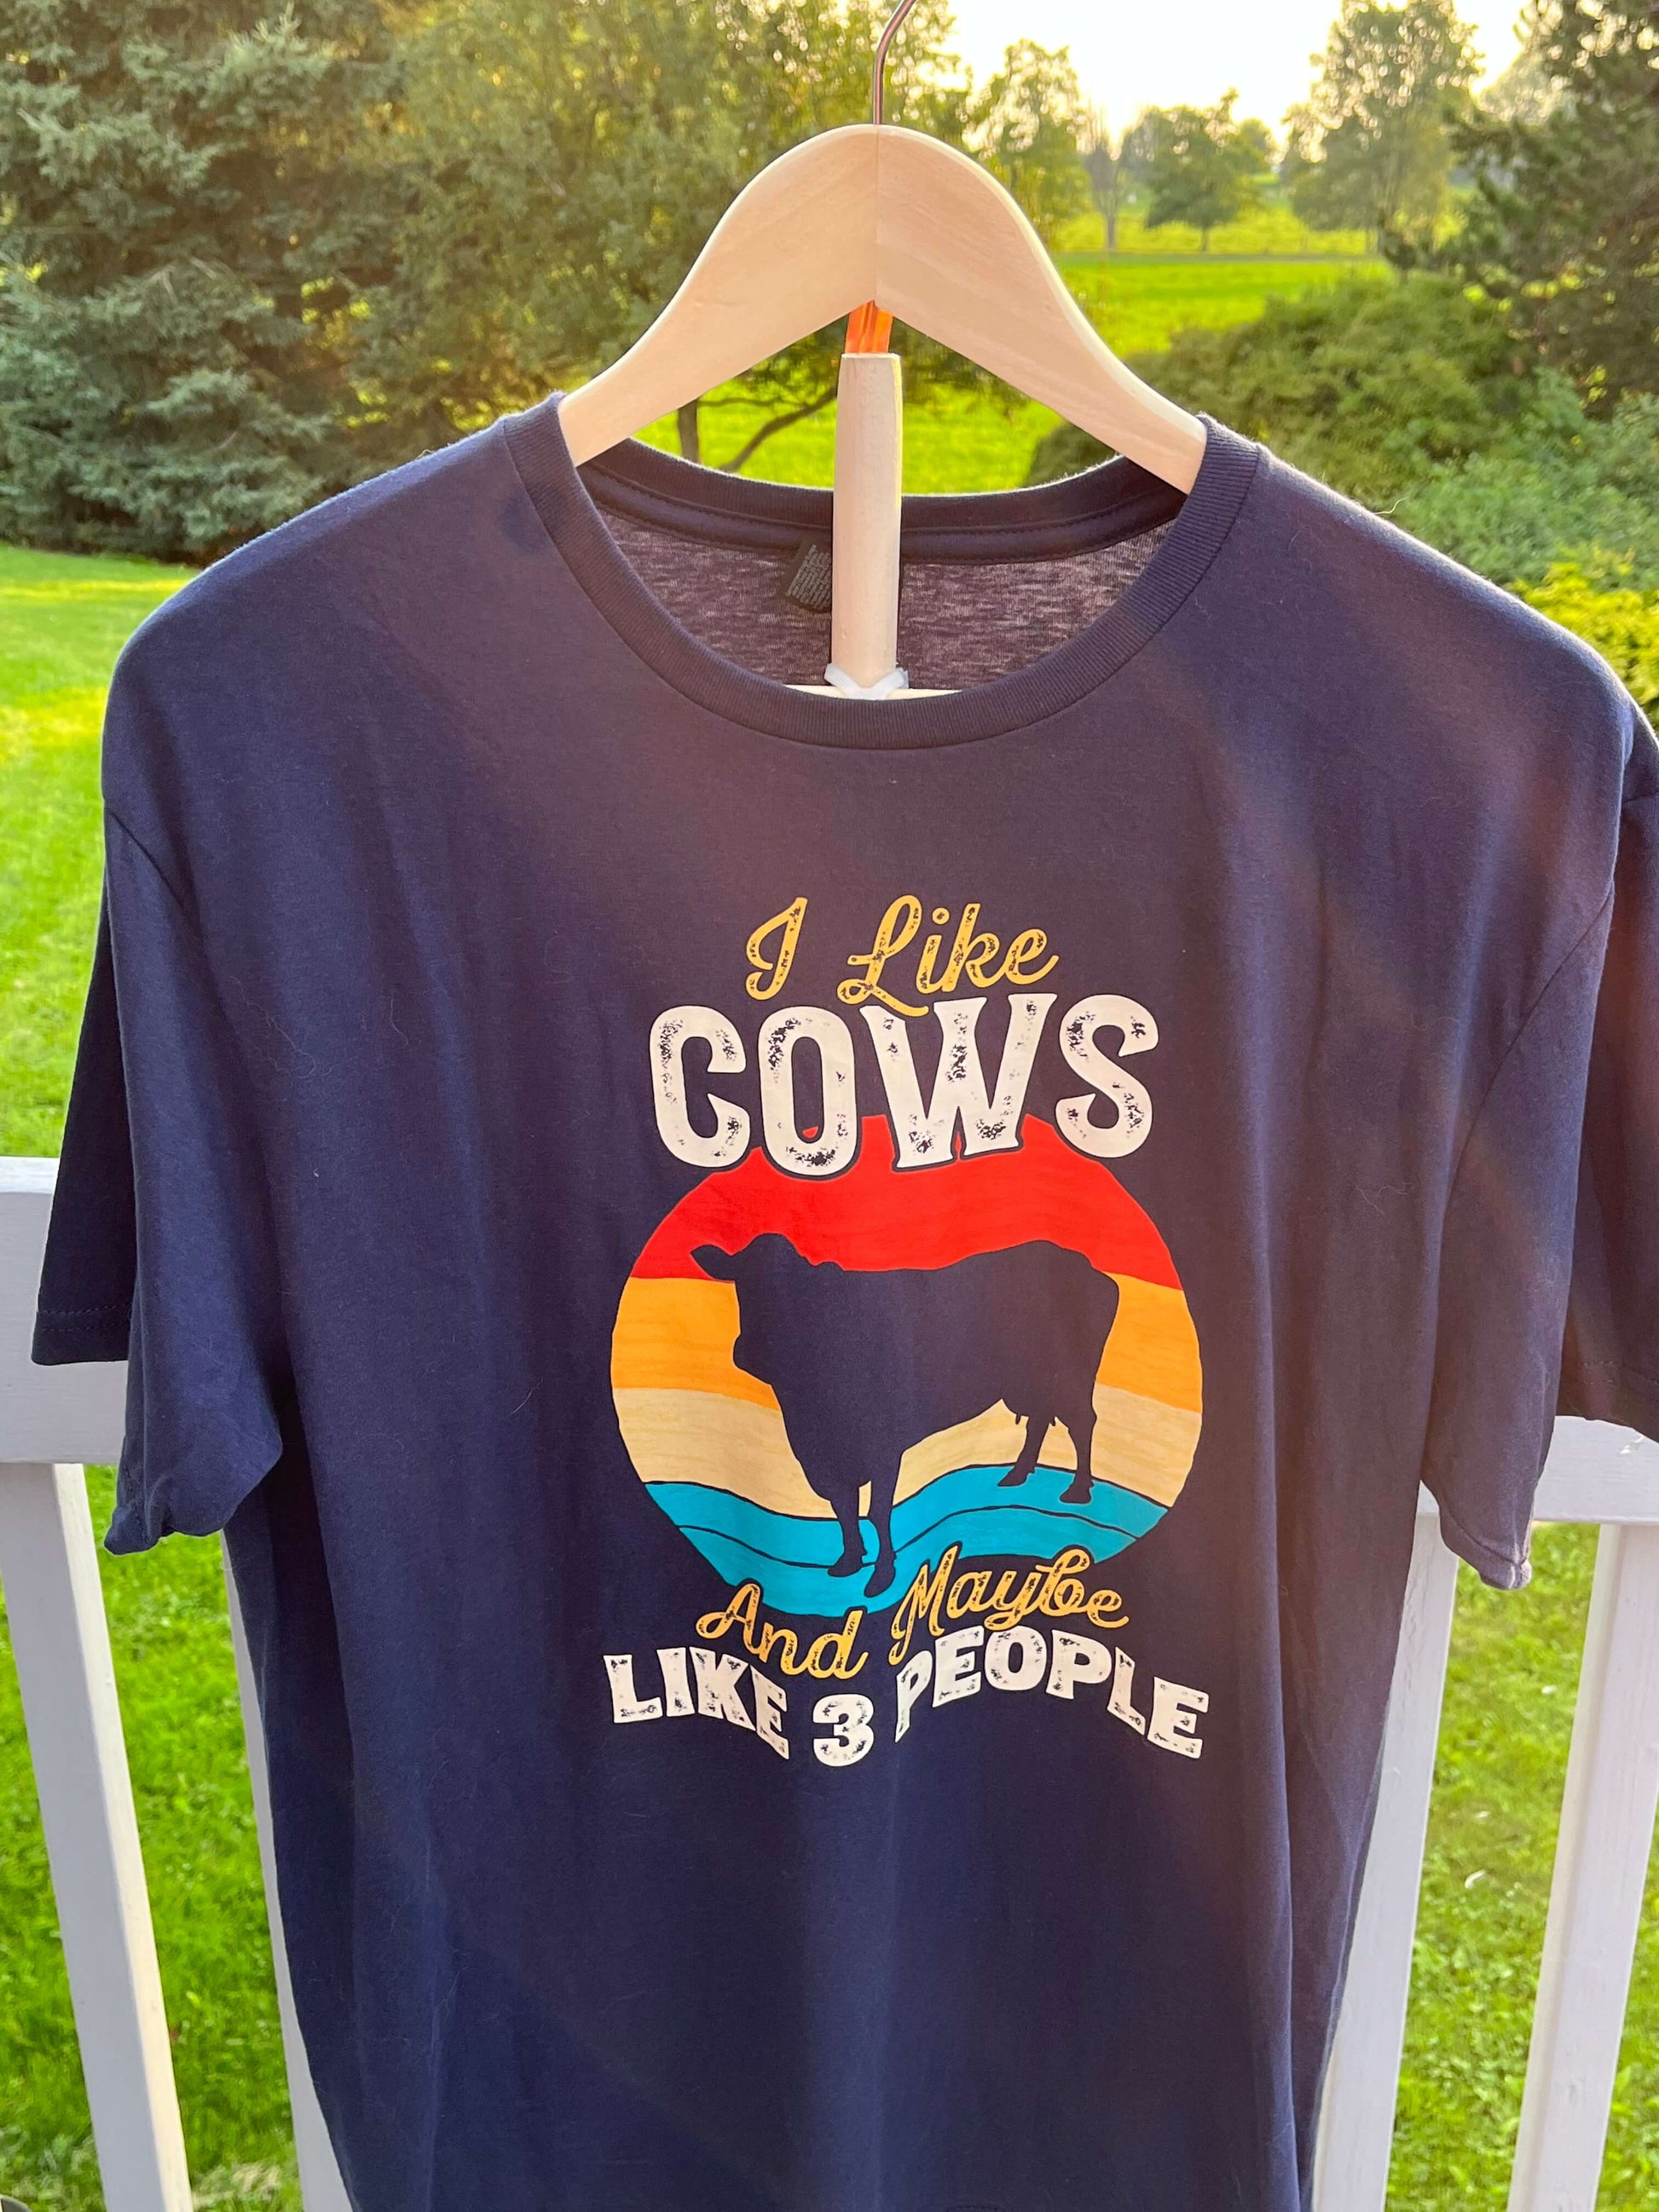 I Like Cows and Maybe 3 People T-shirt unisex